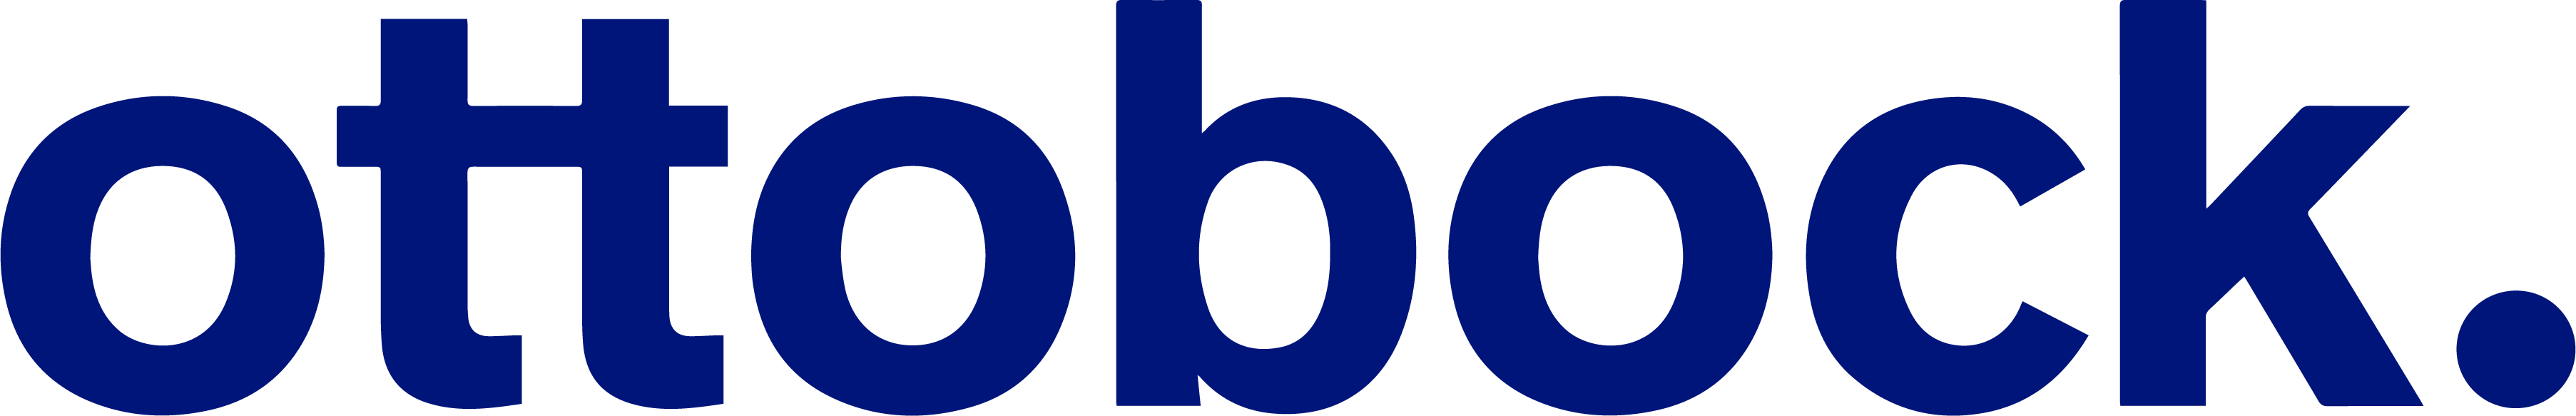 The word ottobock written on a white background in dark blue lettering.